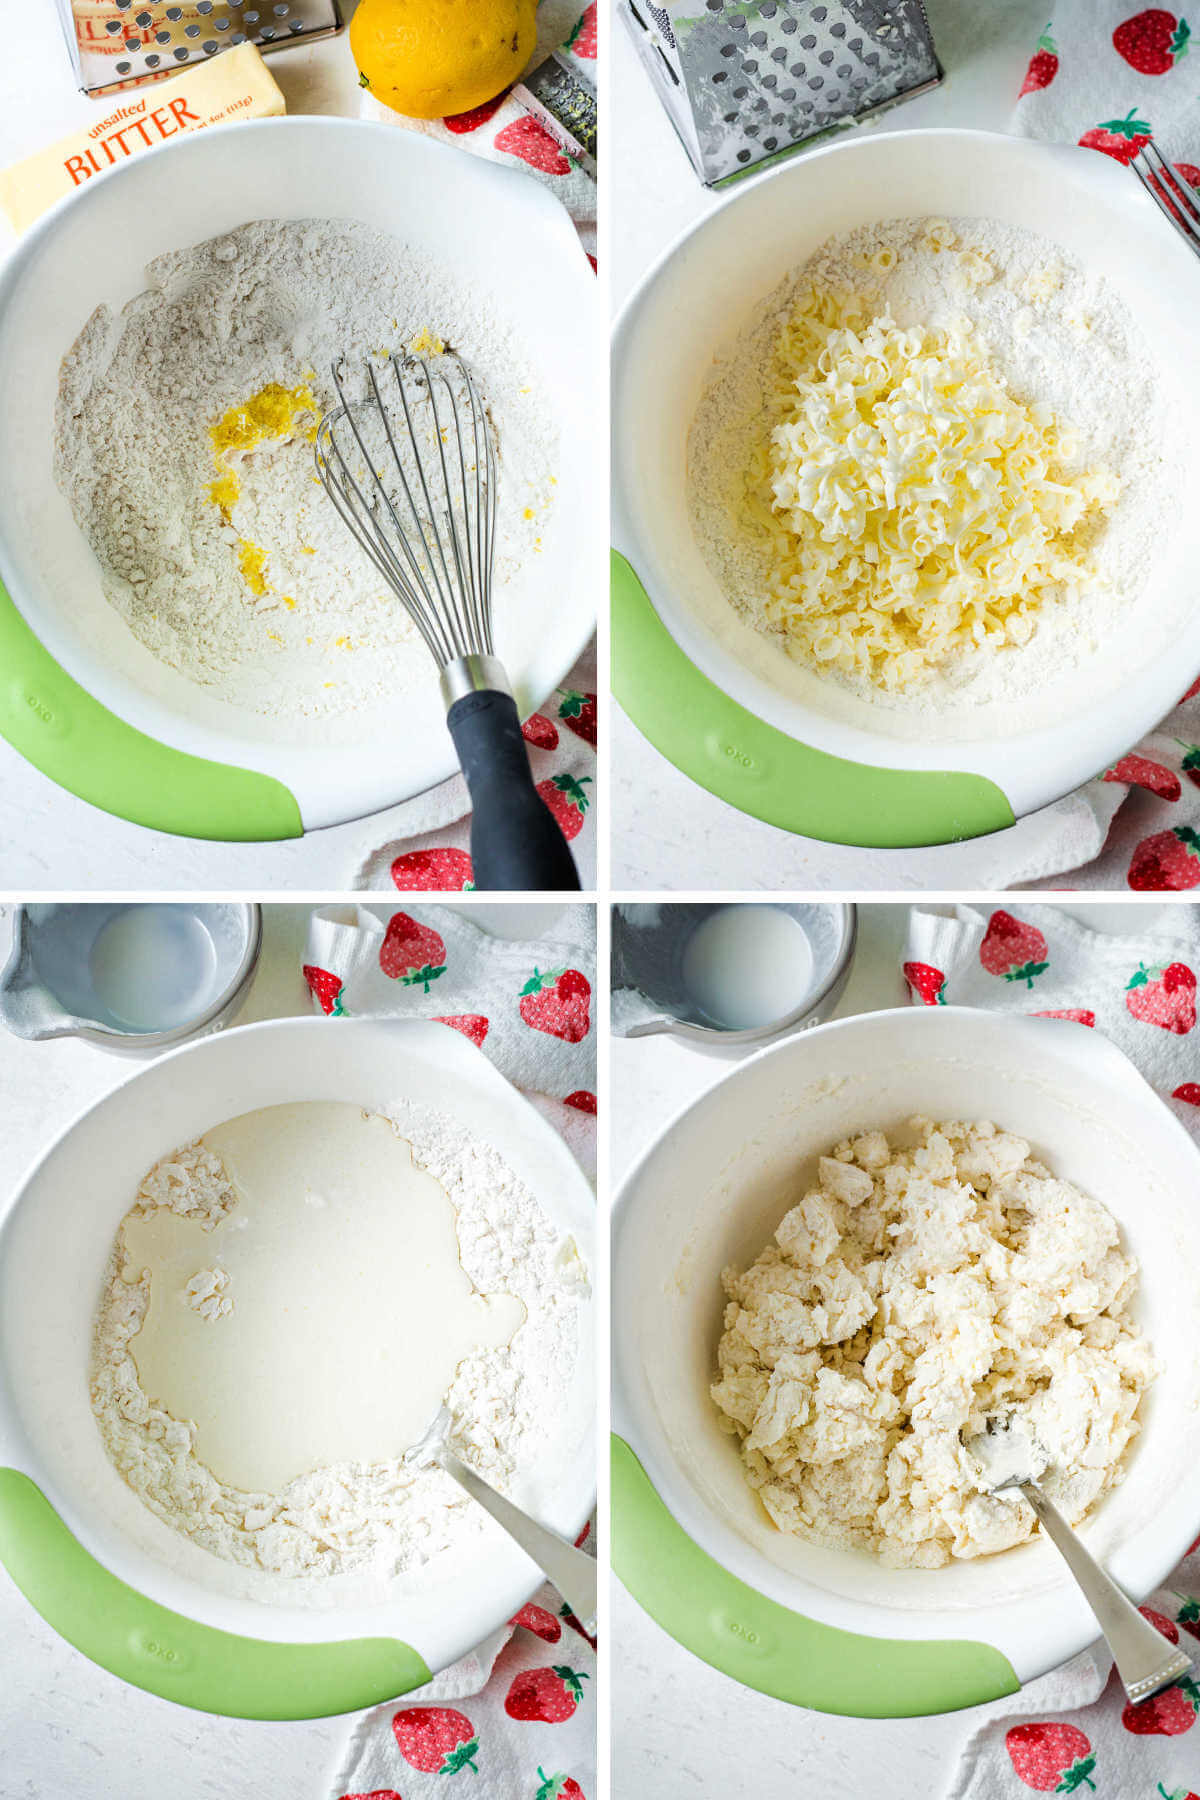 process steps for making the dough for strawberry scones; whisking flour, adding grated butter and cream.